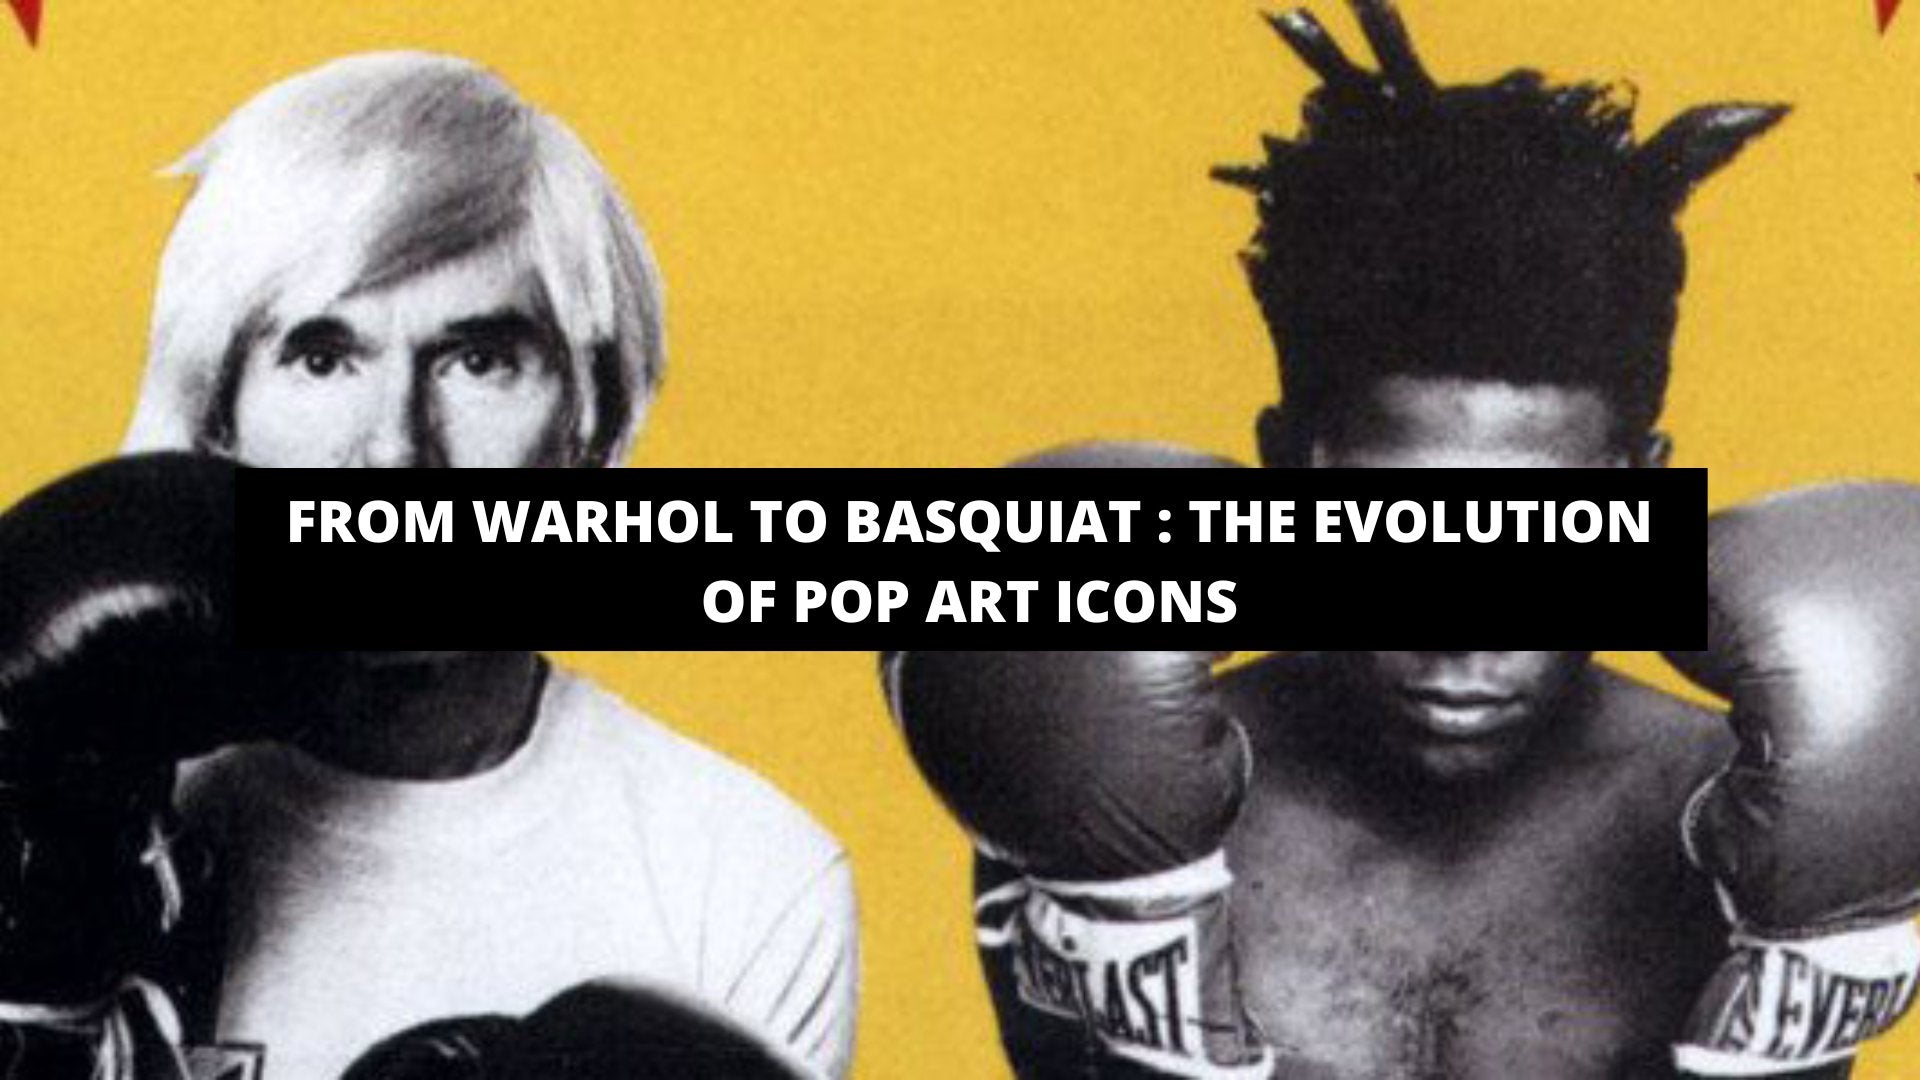 From Warhol To Basquiat: The Evolution Of Pop Art Icons - The Trendy Art